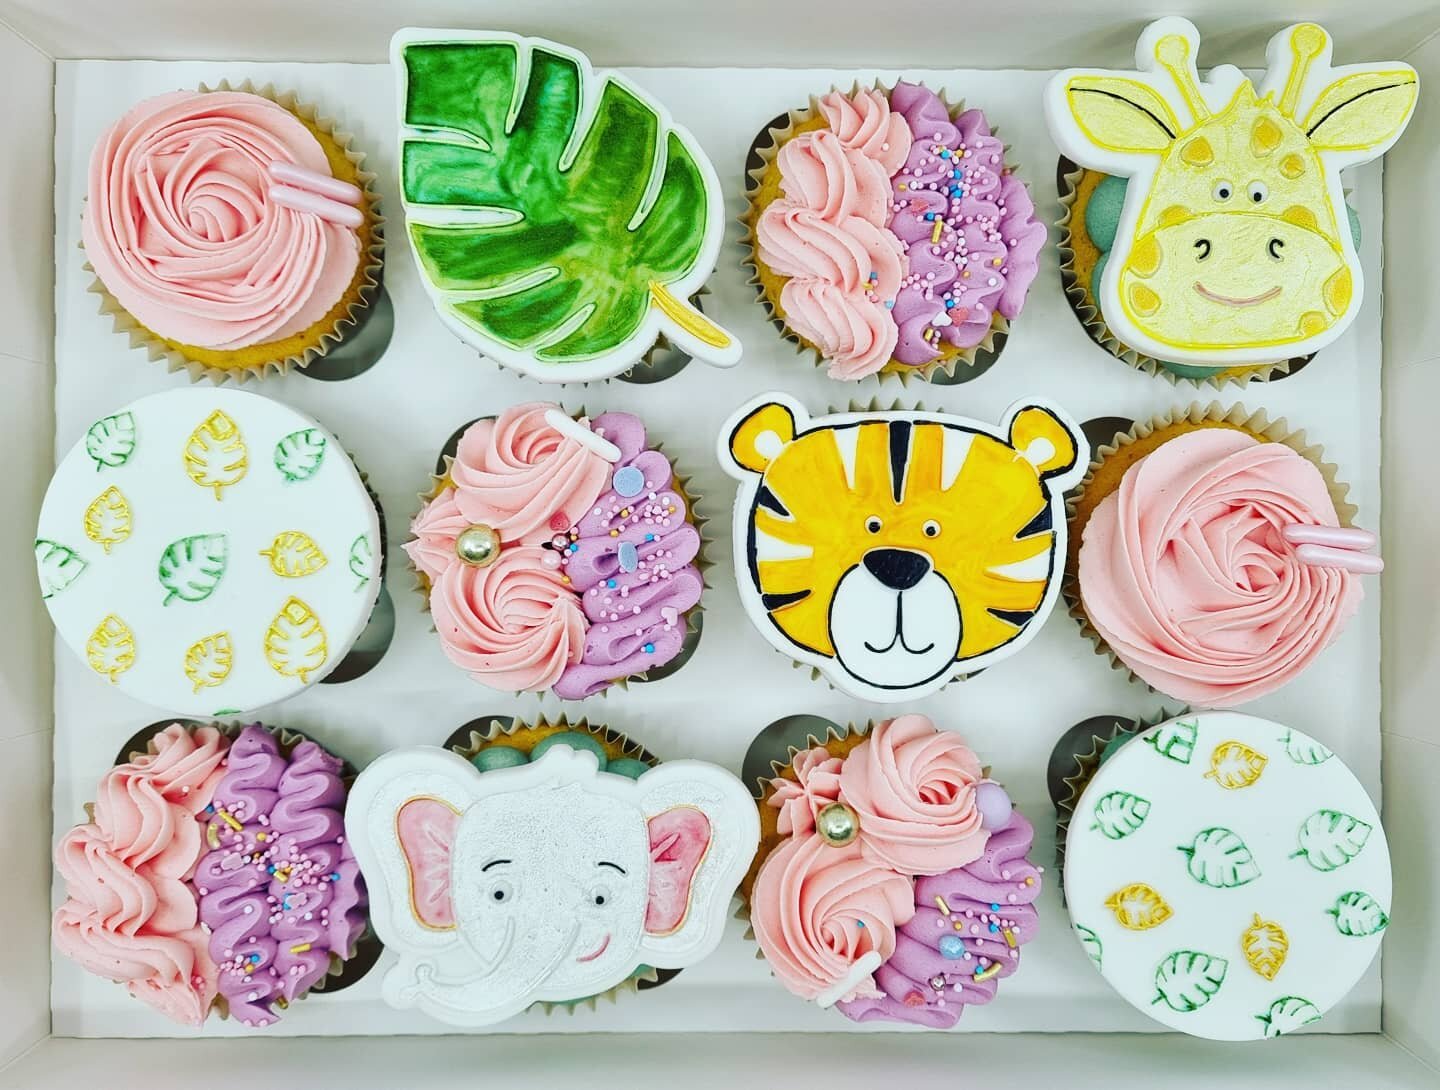 Cupcakes for a little girl who loves animals, pink and purple